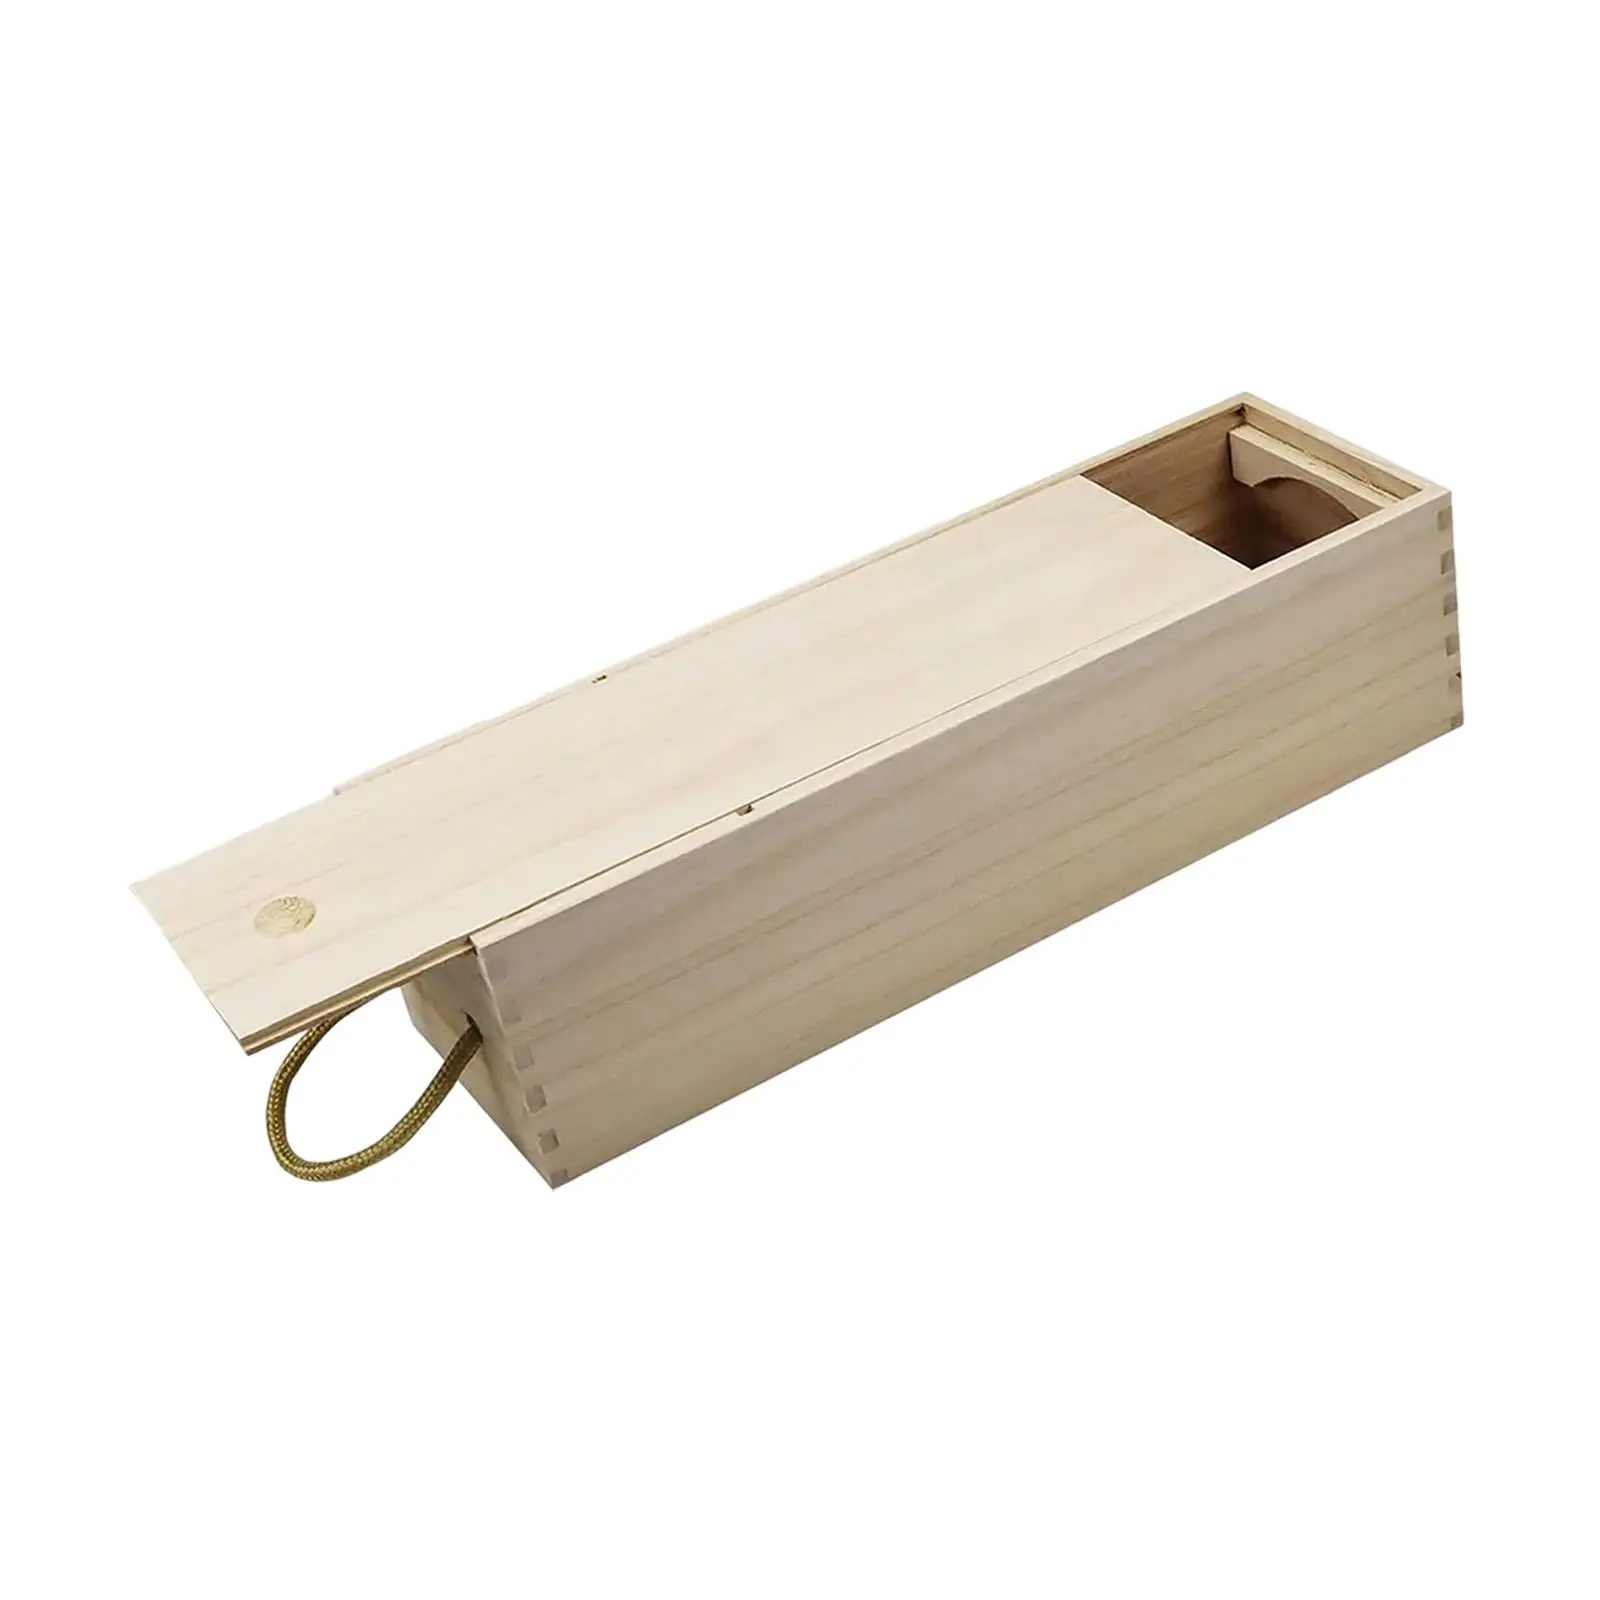 Single Wine Bottle Wood Storage Gift Box 34x11x11cm Wine Carrier for Party Wedding